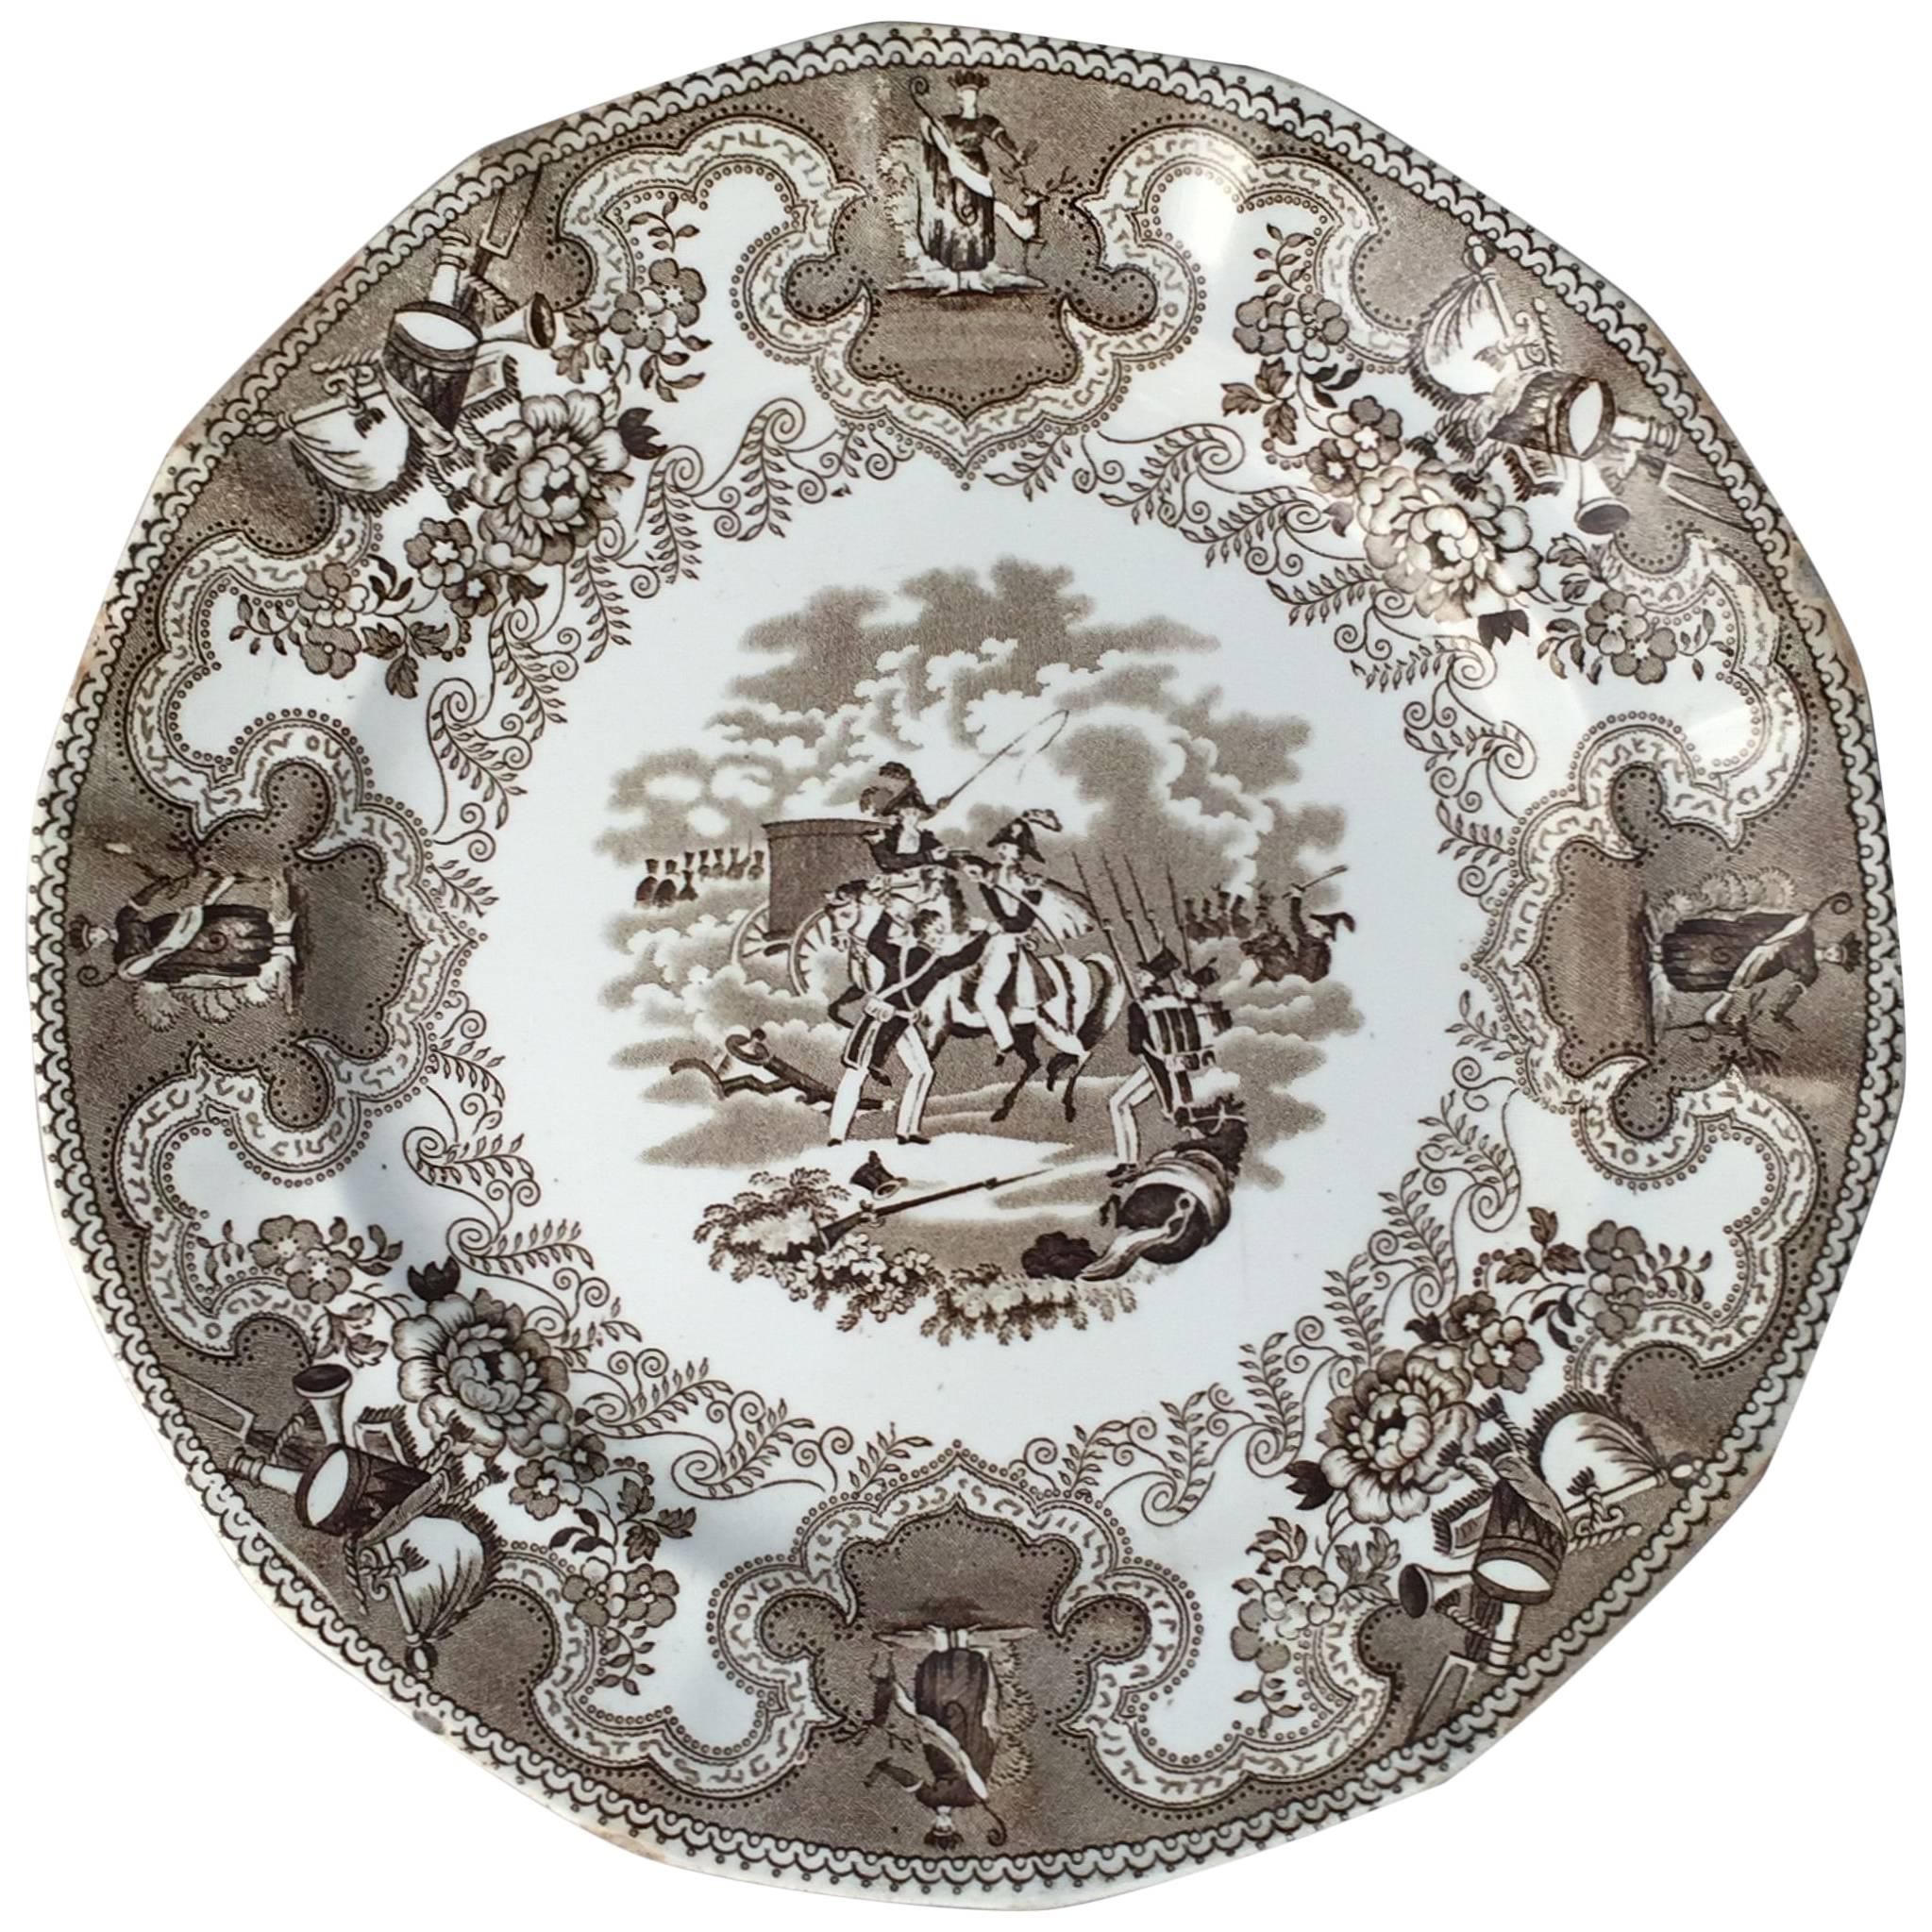 English Brown and White Plate, 'Texian Campaigne' by Thomas Walker